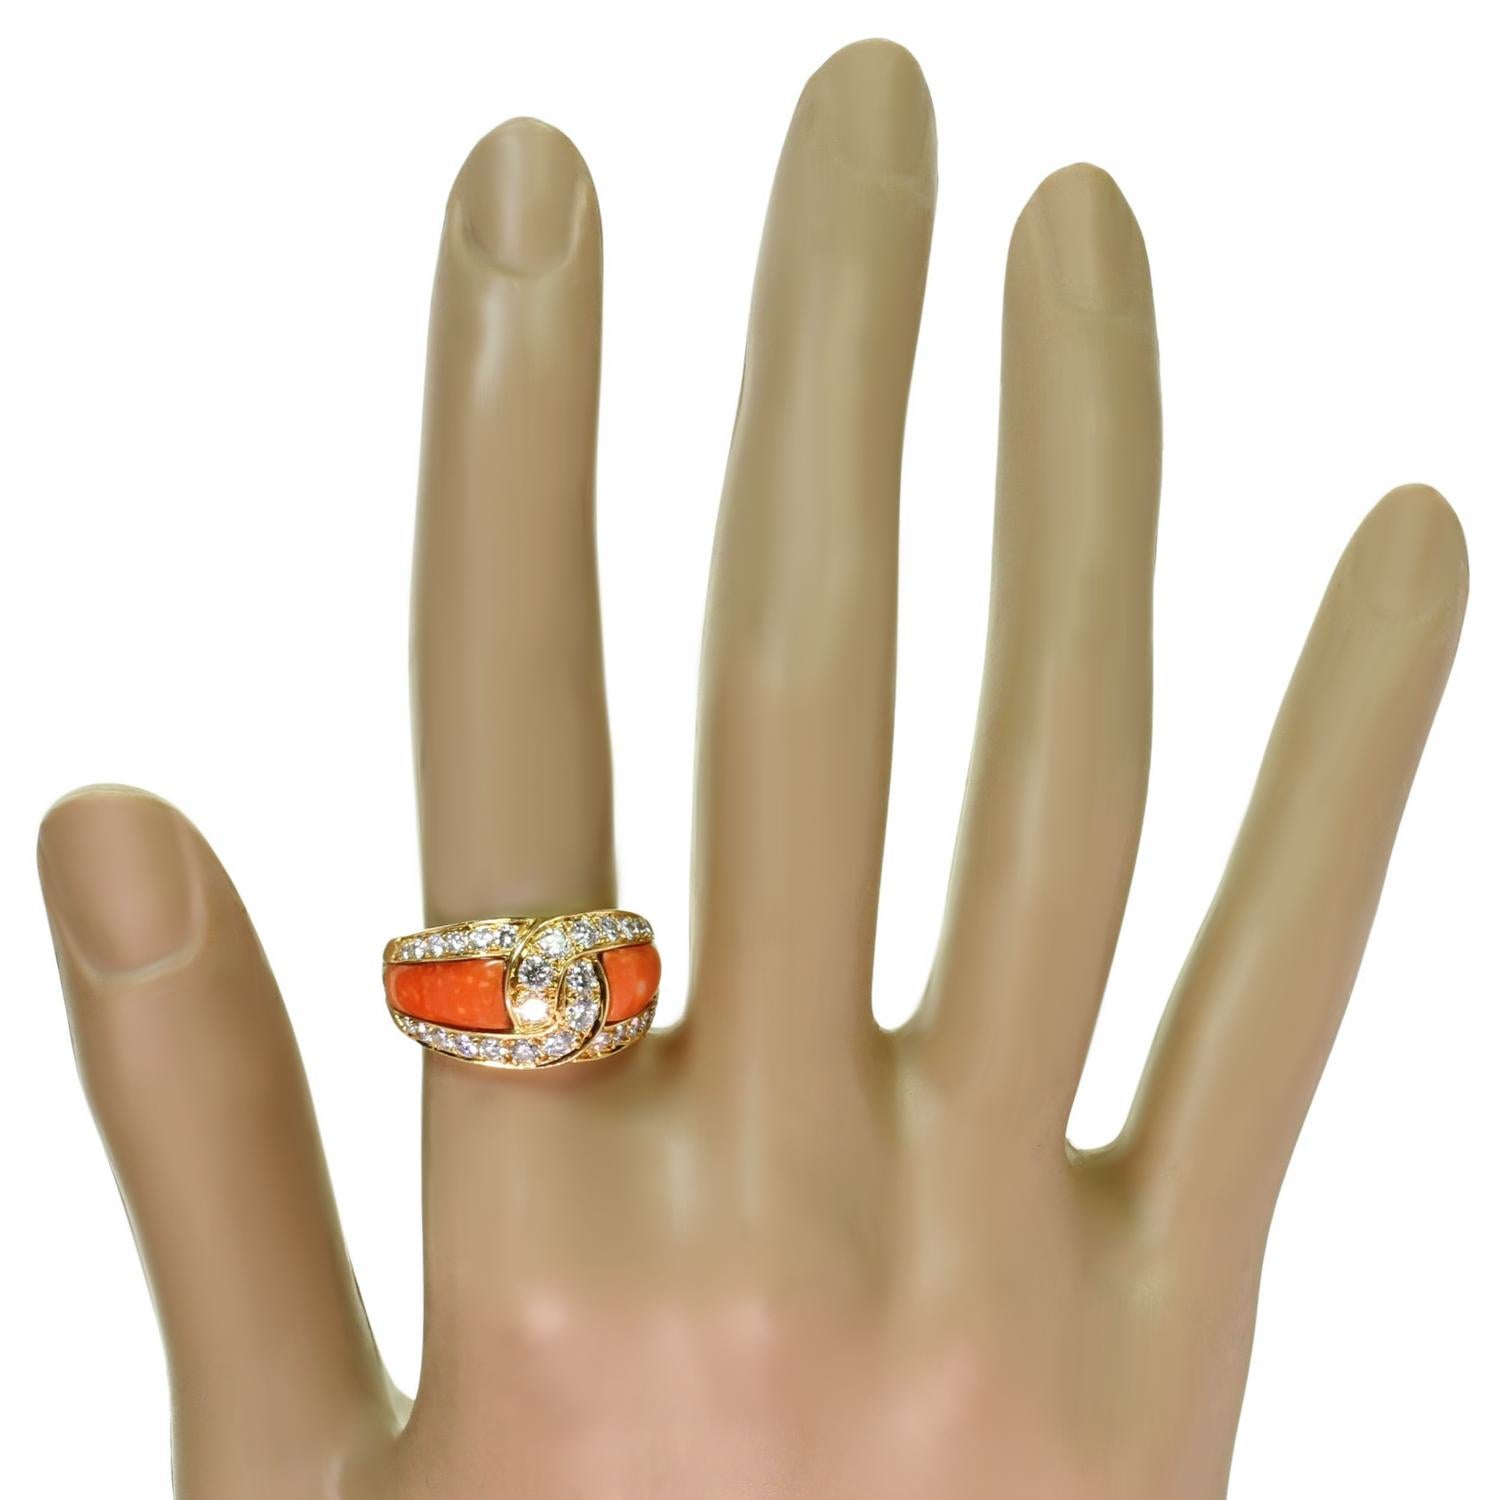 VAN CLEEF & ARPELS Coral Diamond Yellow Gold Ring In Excellent Condition For Sale In New York, NY